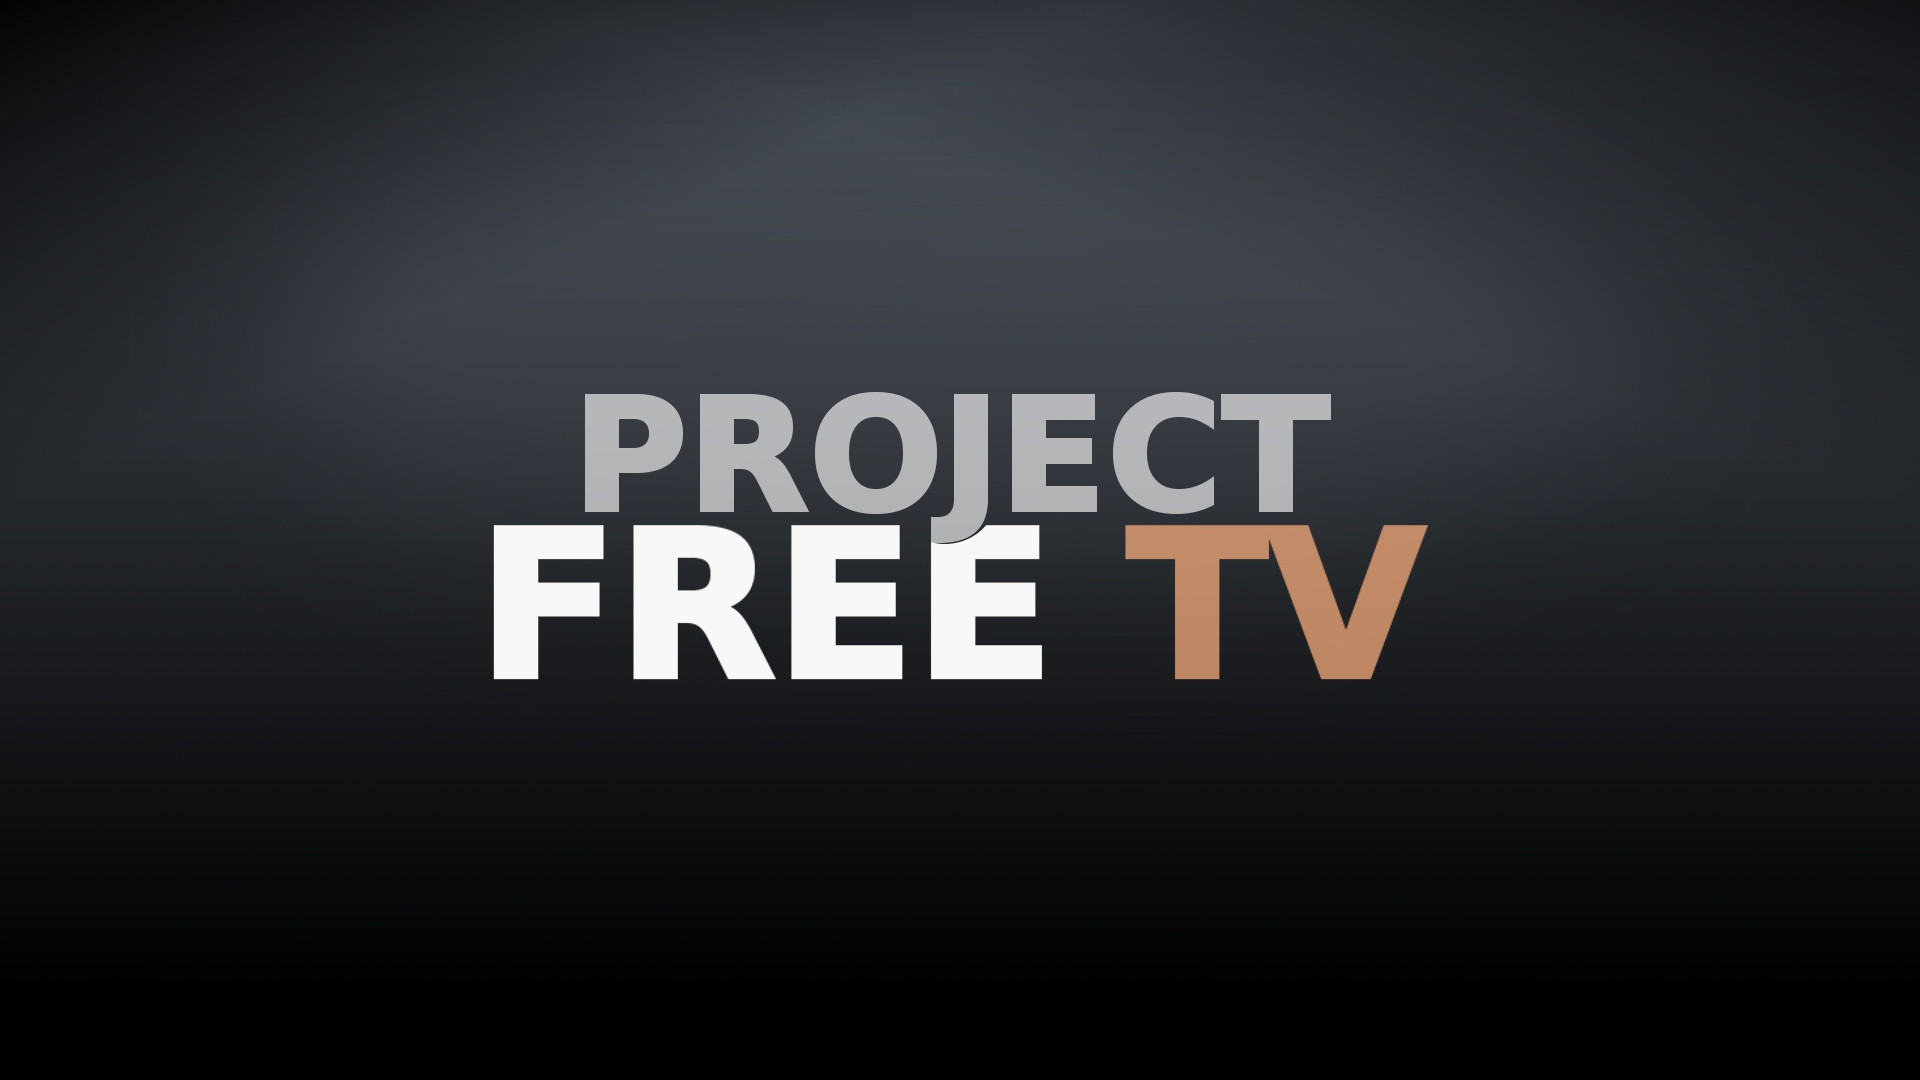 3 Quick Ways to Watch TV Shows for FREE